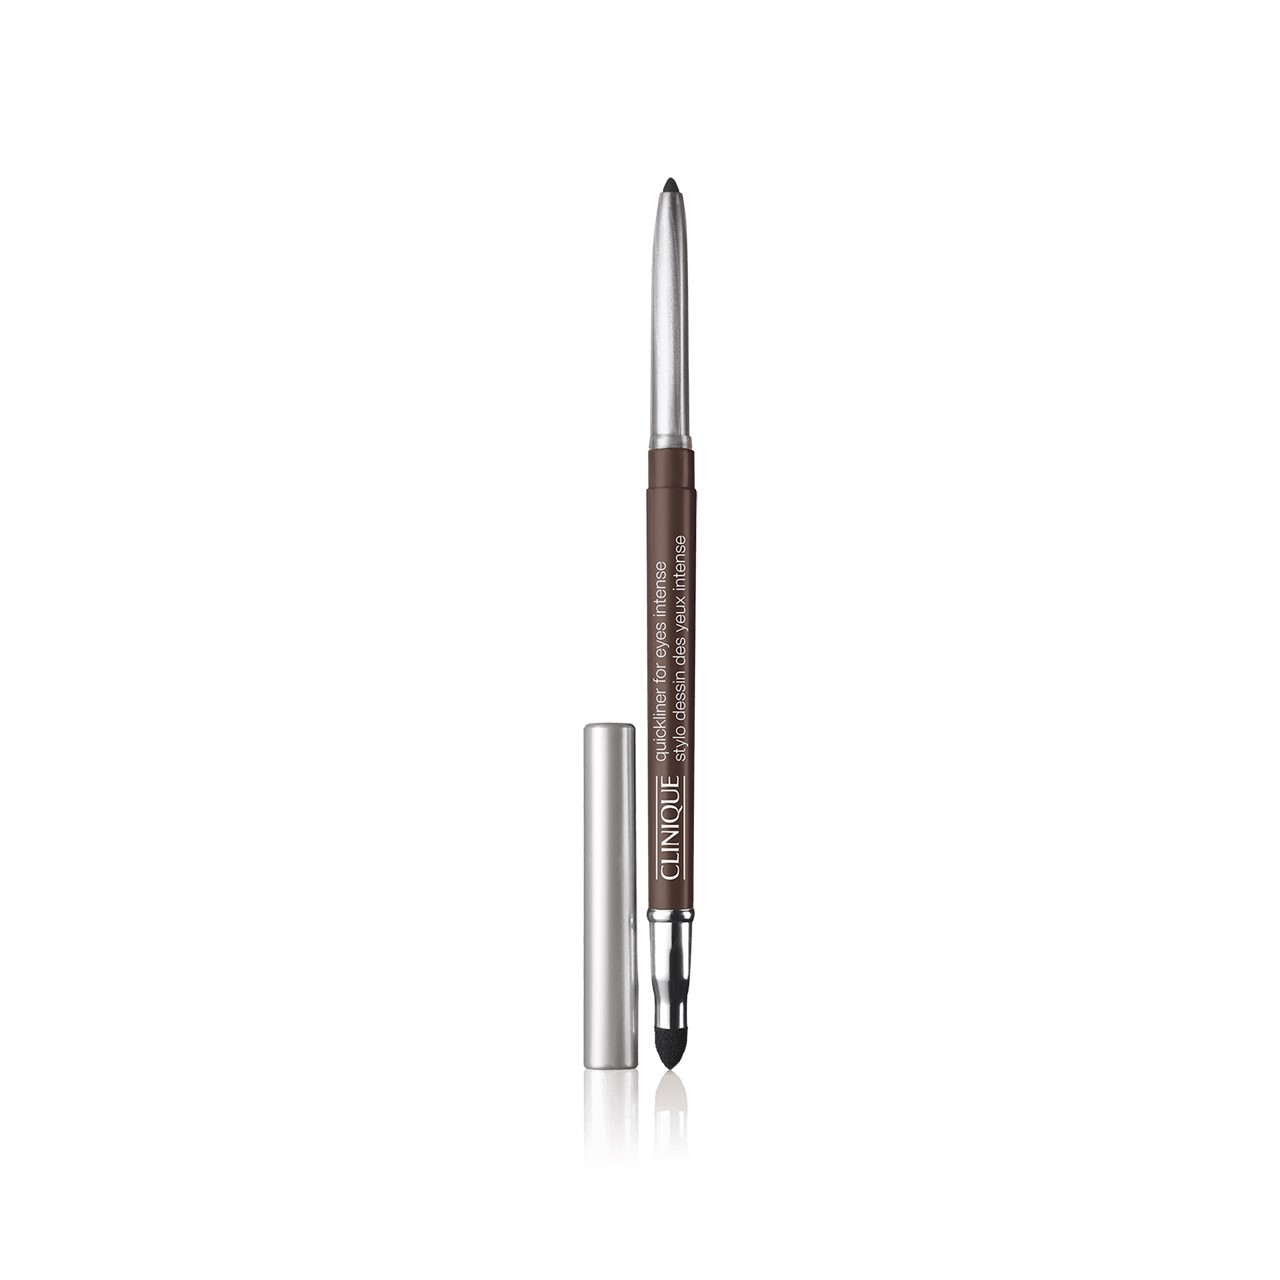 Clinique Quickliner For Eyes Intense Chocolate 0.28g (0.01oz)